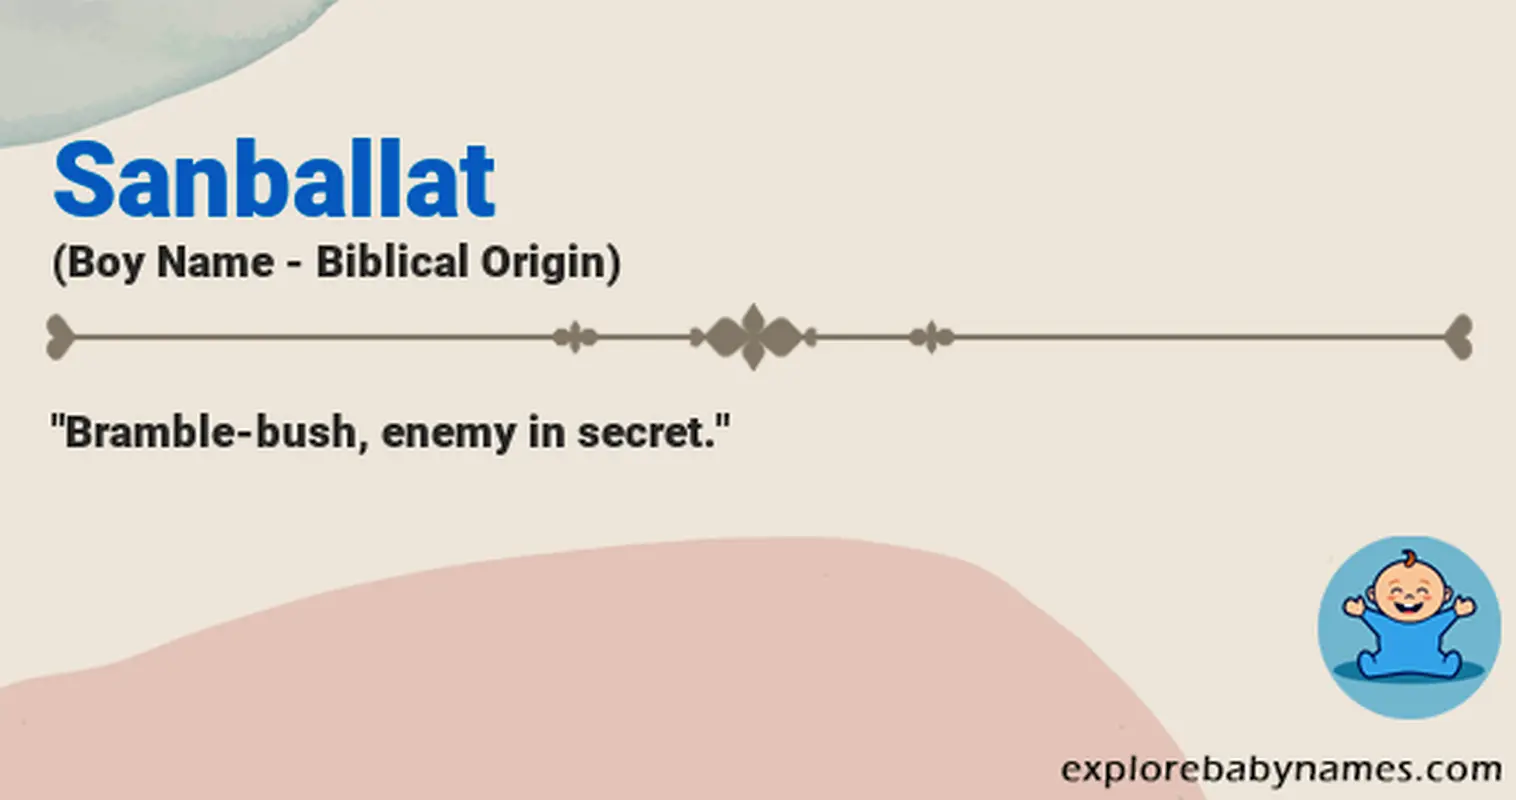 Meaning of Sanballat